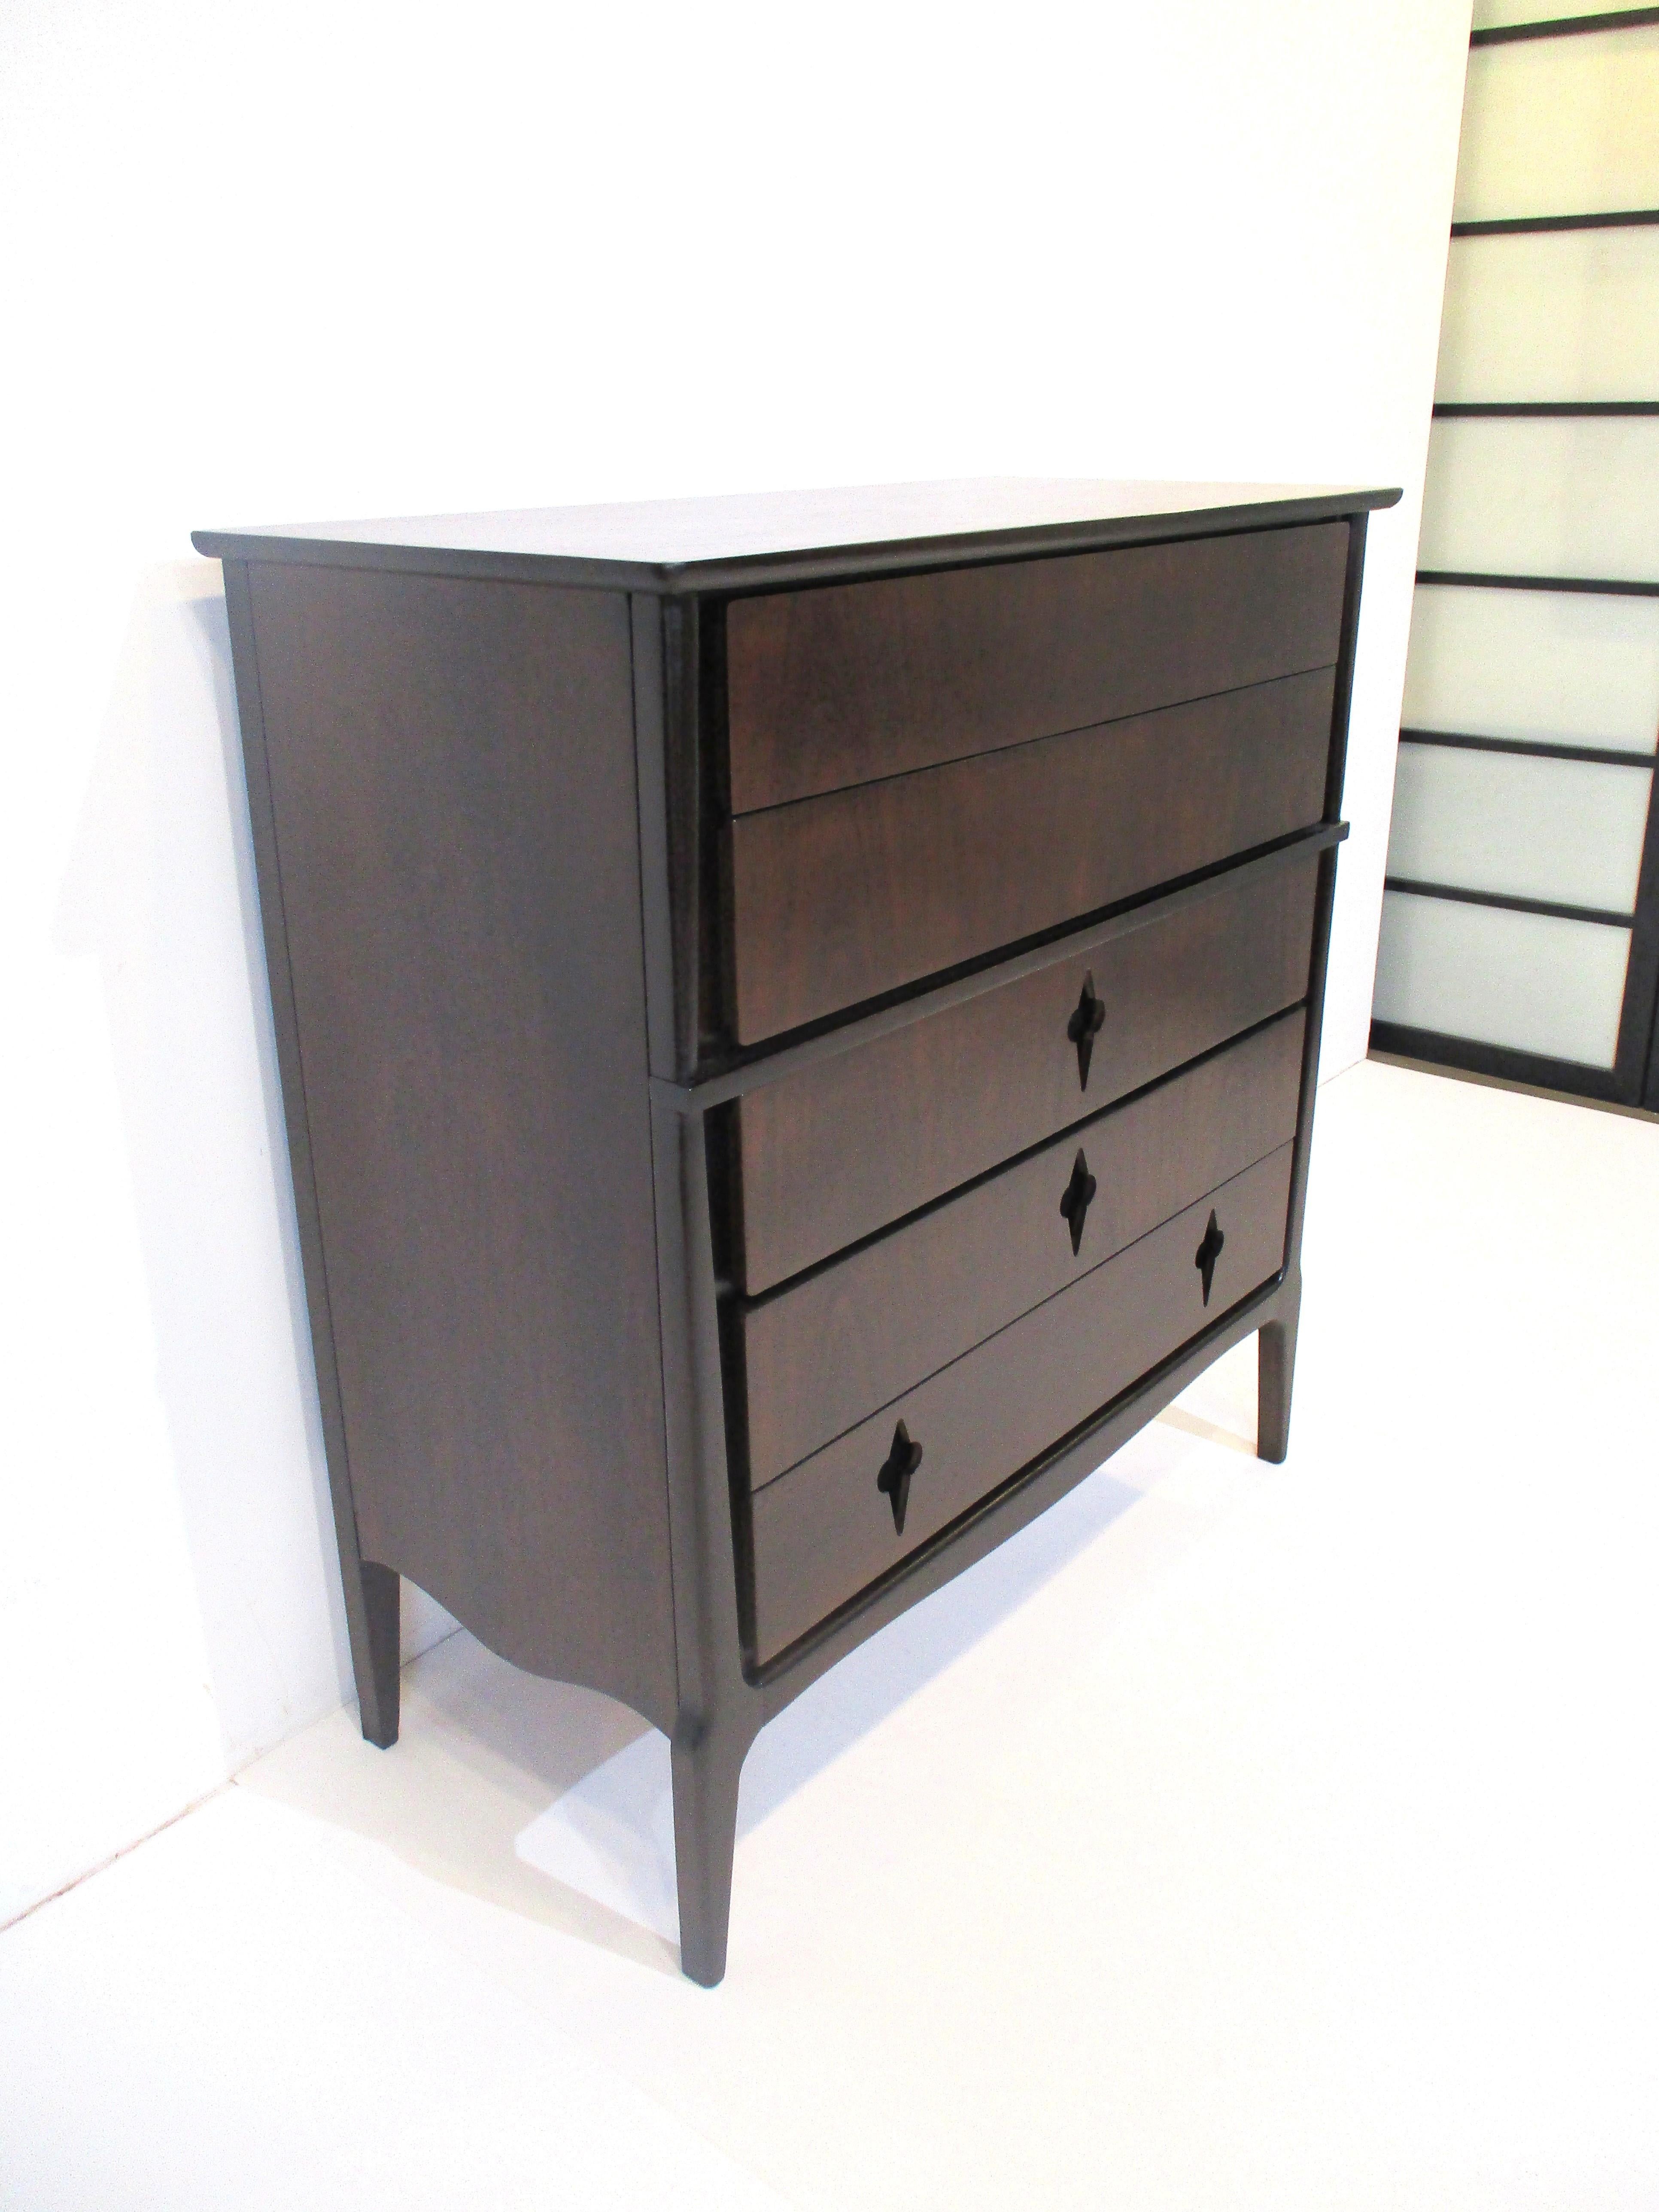 A ebony toned walnut five drawer dresser chest with darker contrasting wood frame giving the piece a rich and well crafted look . The three bottom drawers have a de-lis fleur midcentury styled cutouts used for pulls, manufactured by the United